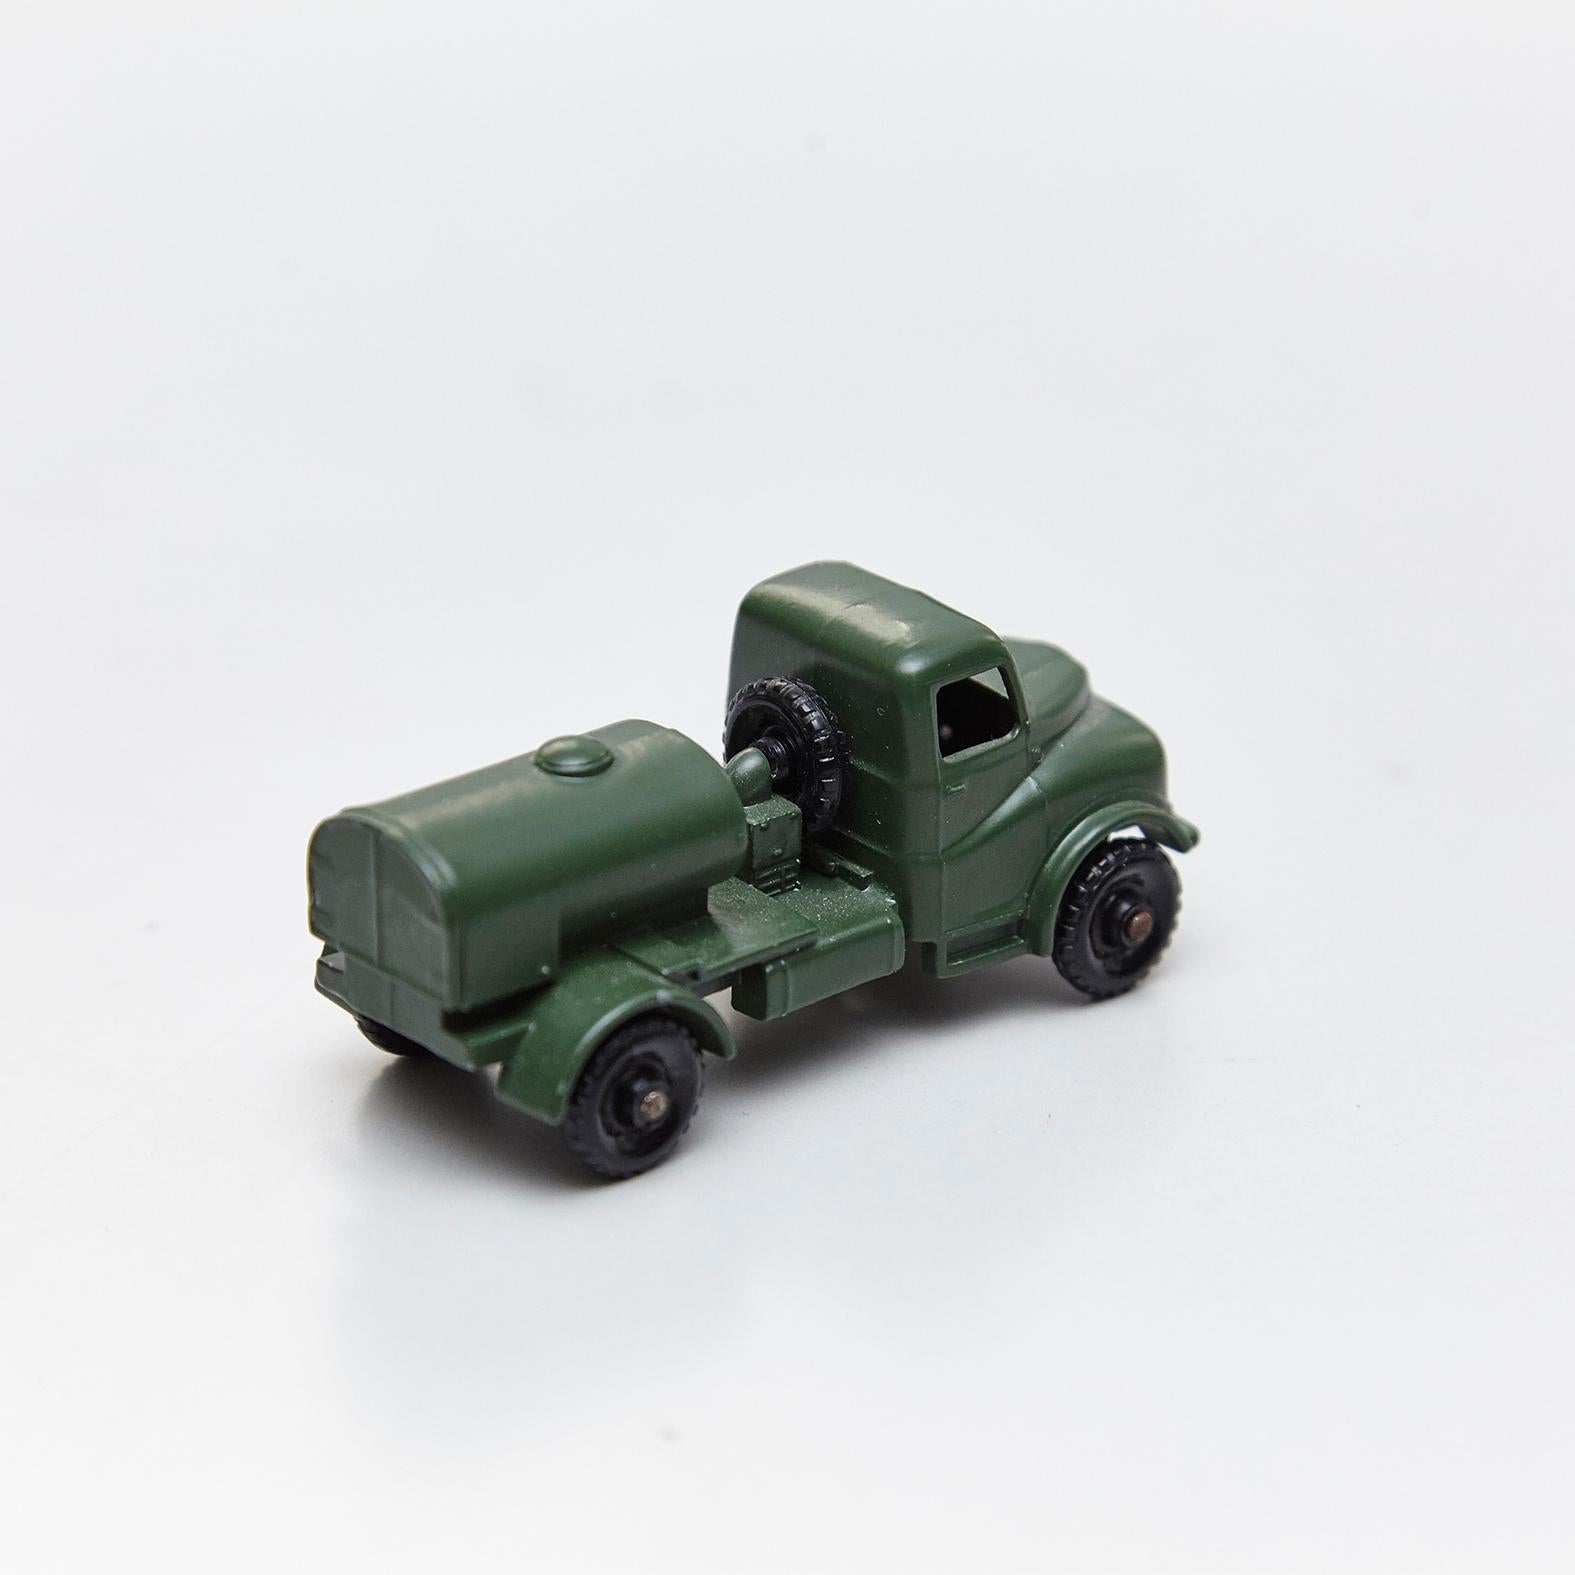 Lesney Matchboxes Series Antique Metal Toy Cars Green Military - Free Shipping 4